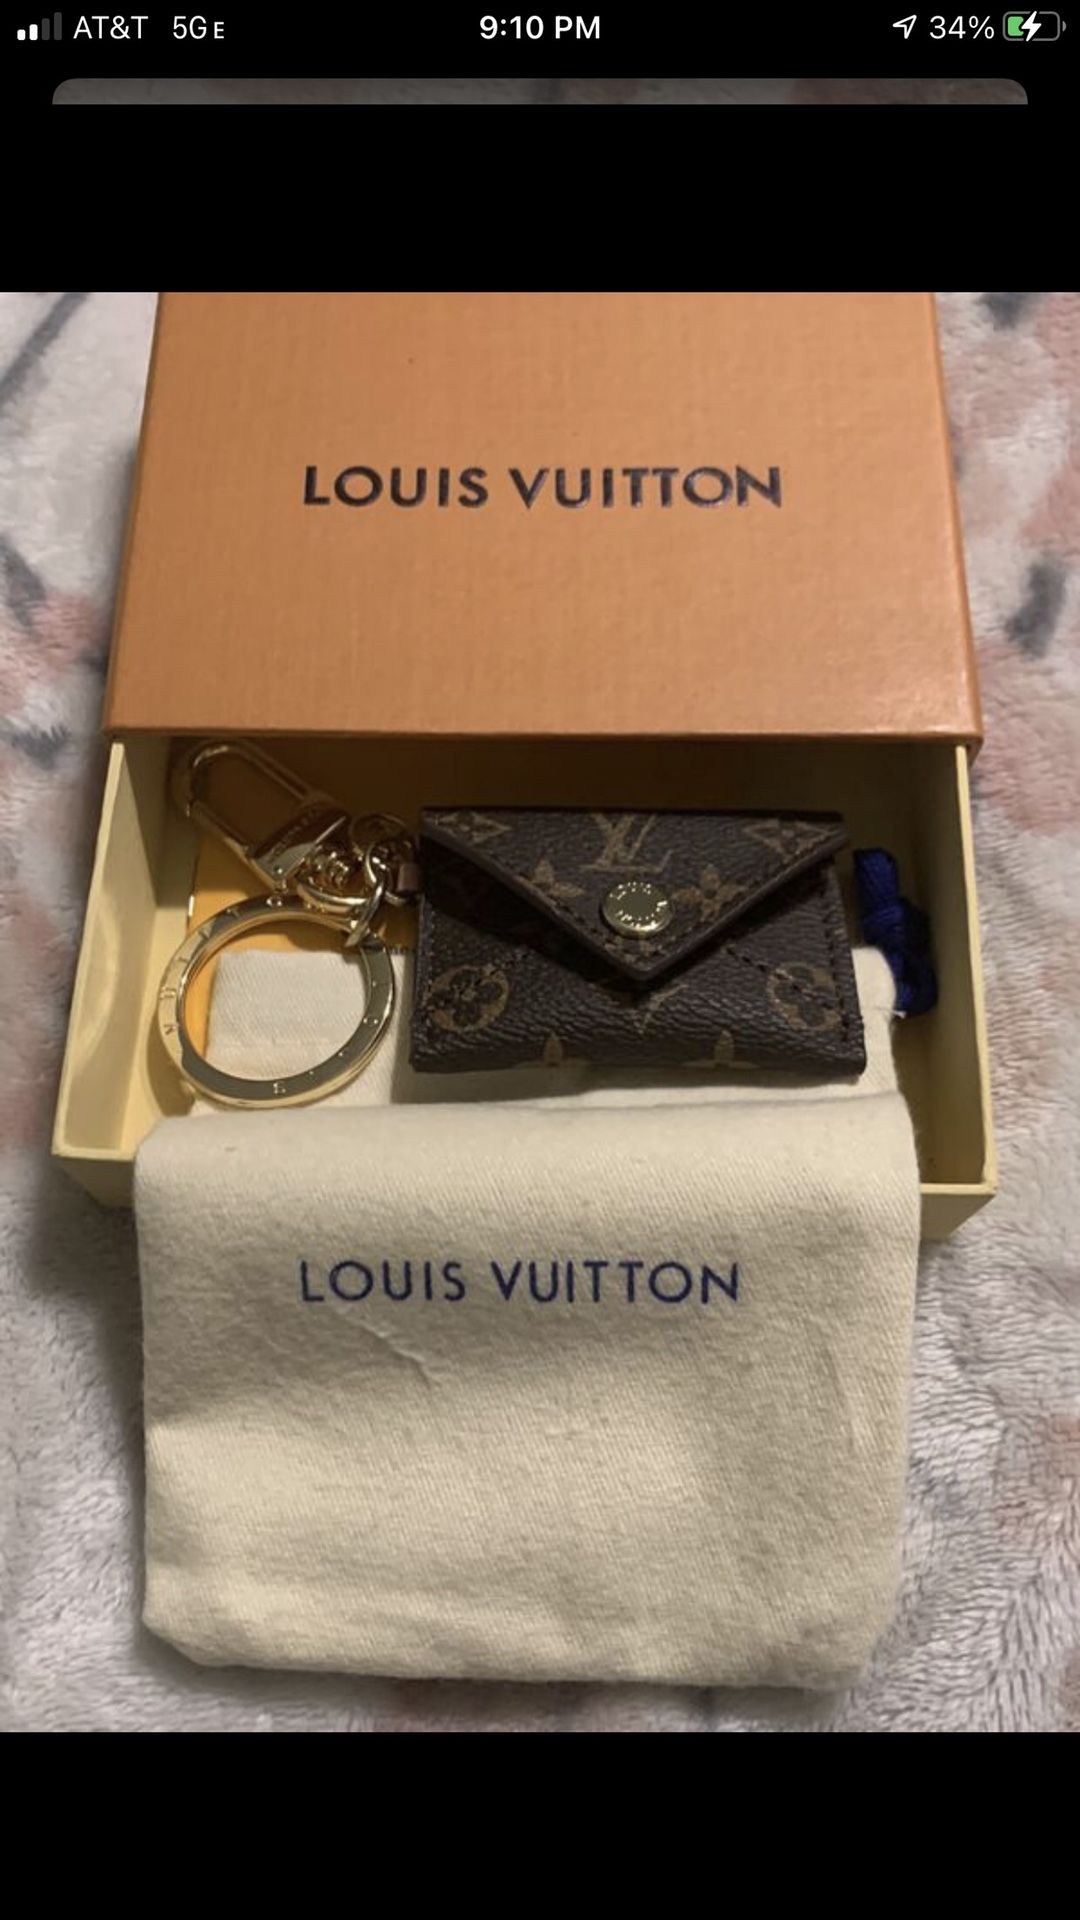 Lv Louis Vuitton Keychin Pouch New In Box